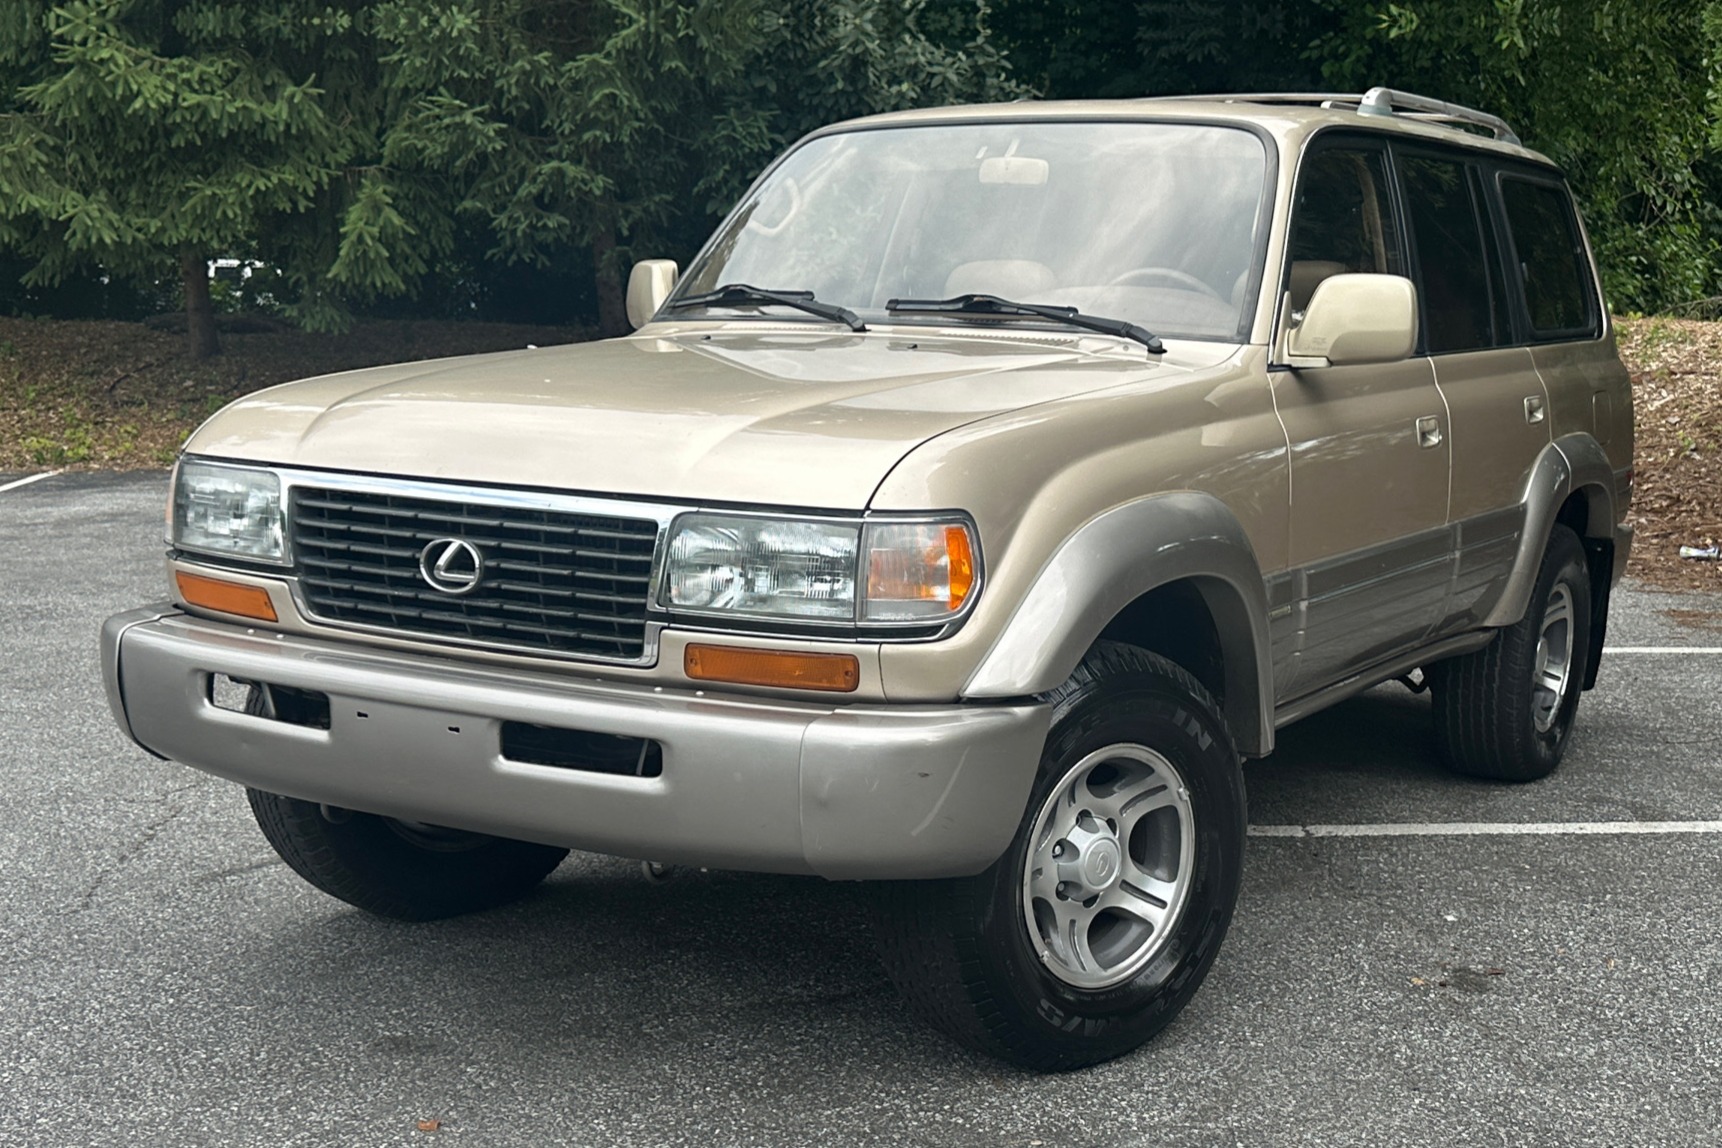 Used 1997 Lexus LX450 Review